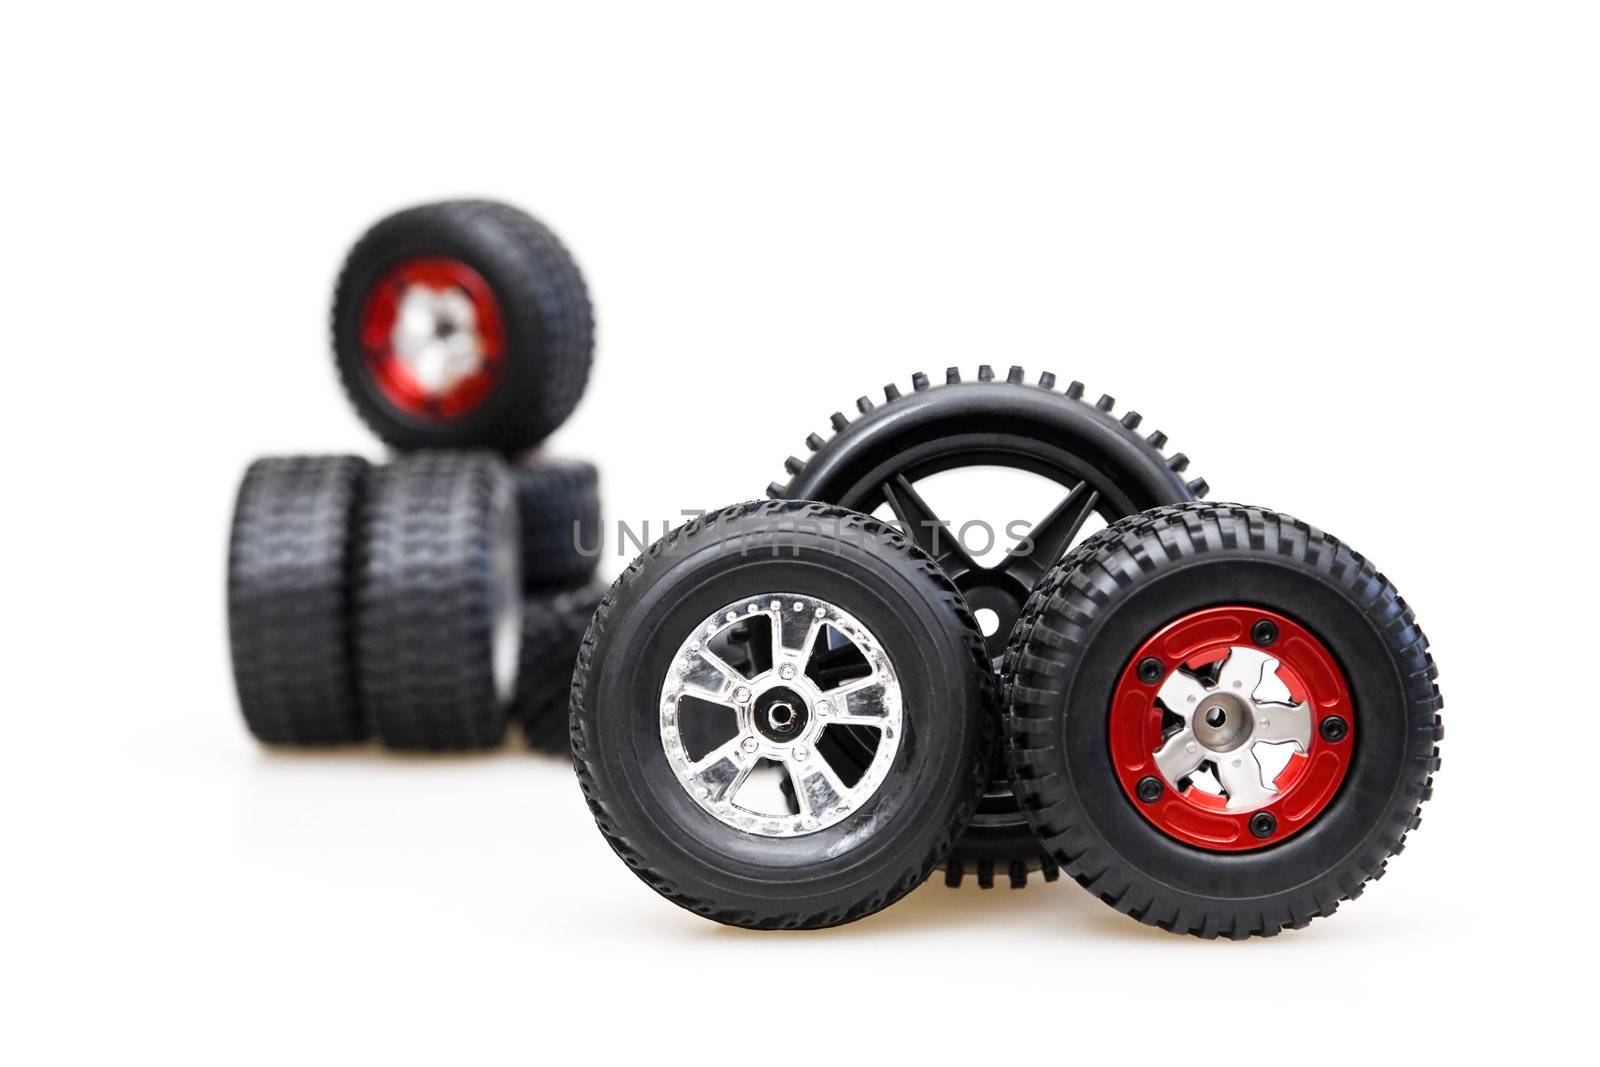 Rubber tires on red rims on a white background by Serp